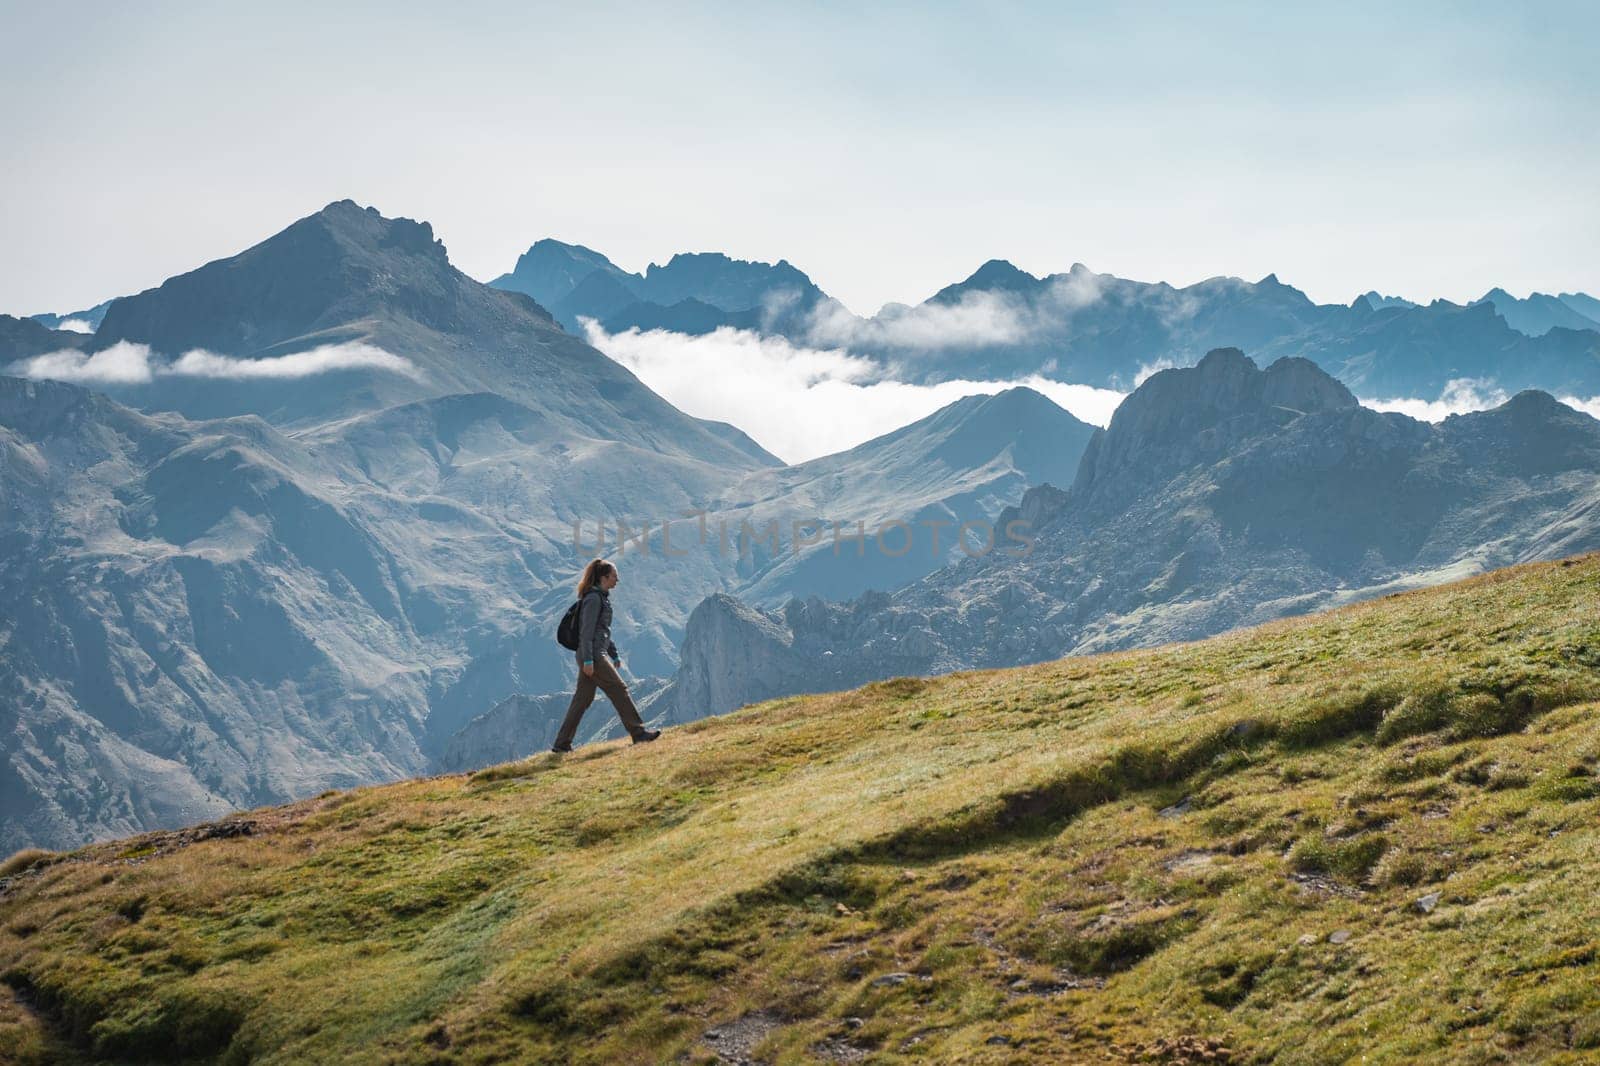 A person is walking on top of a grassy hill in the mountains, enjoying the natural landscape, surrounded by the beauty of the sky, clouds, and mountain range